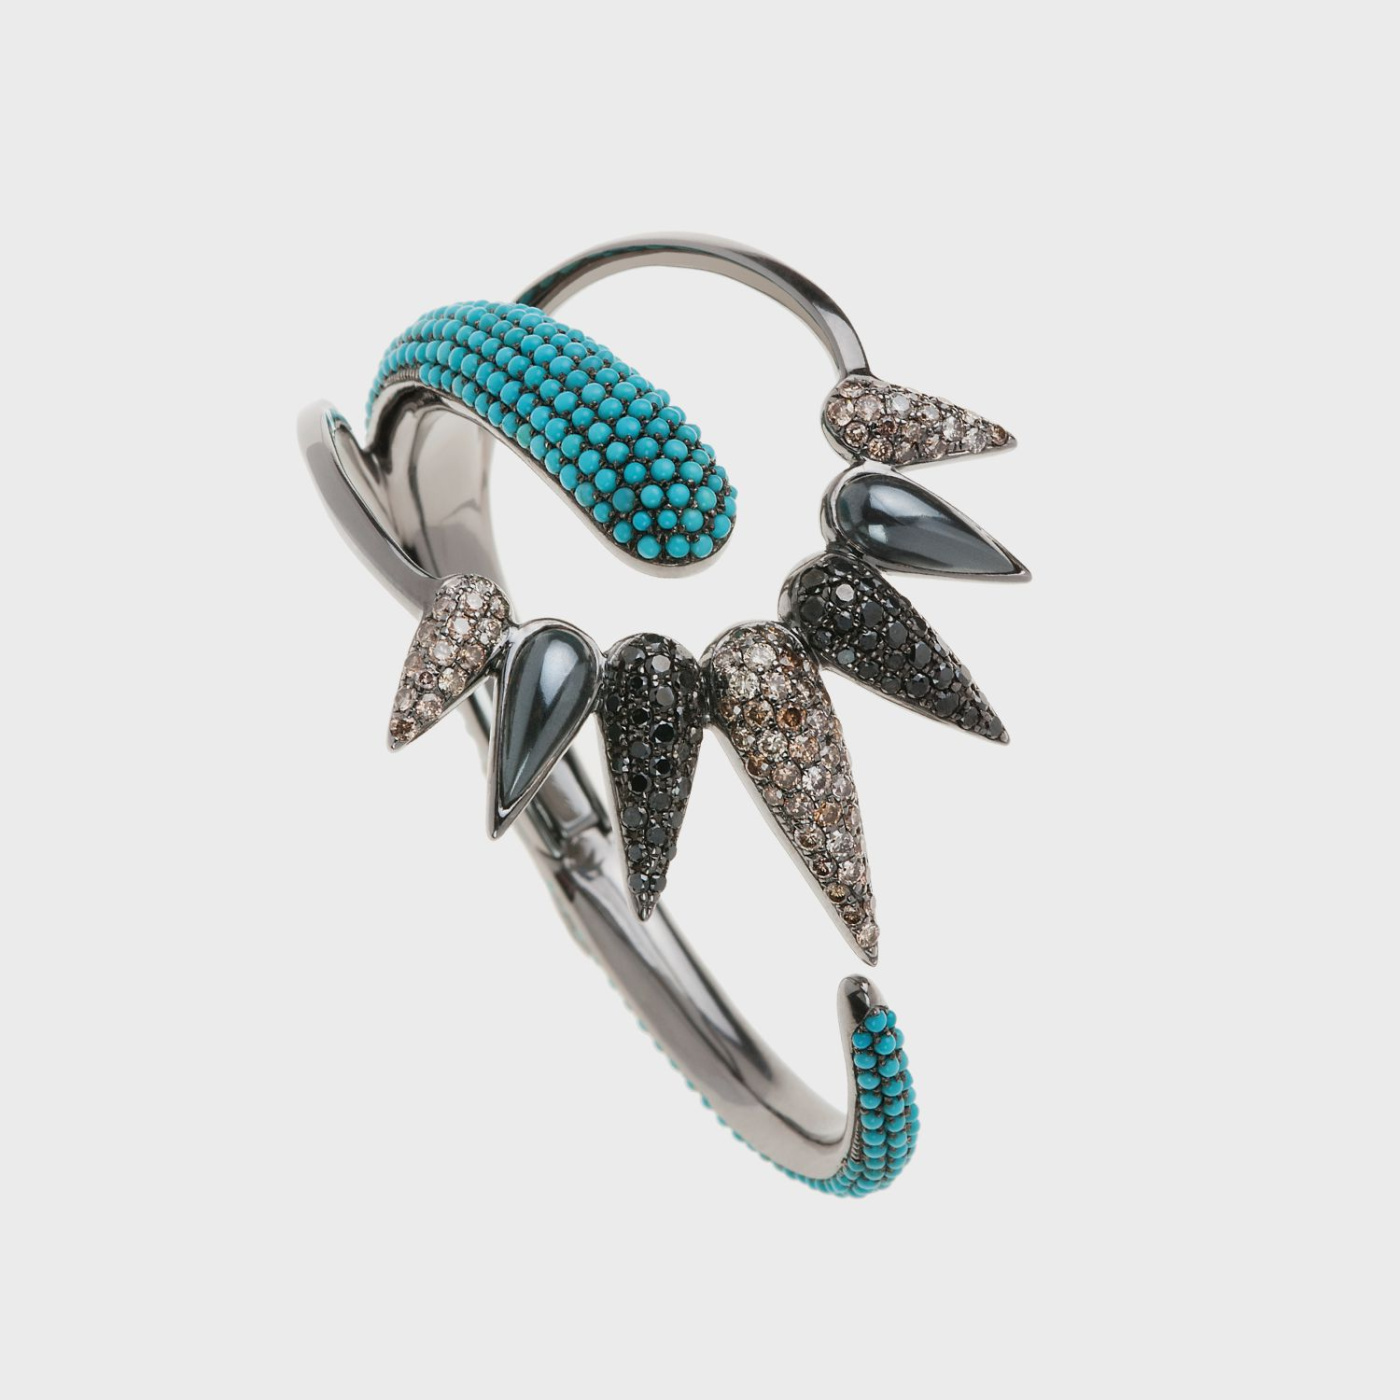 Black gold cuff bracelet with brown diamonds, black diamonds and turquoise